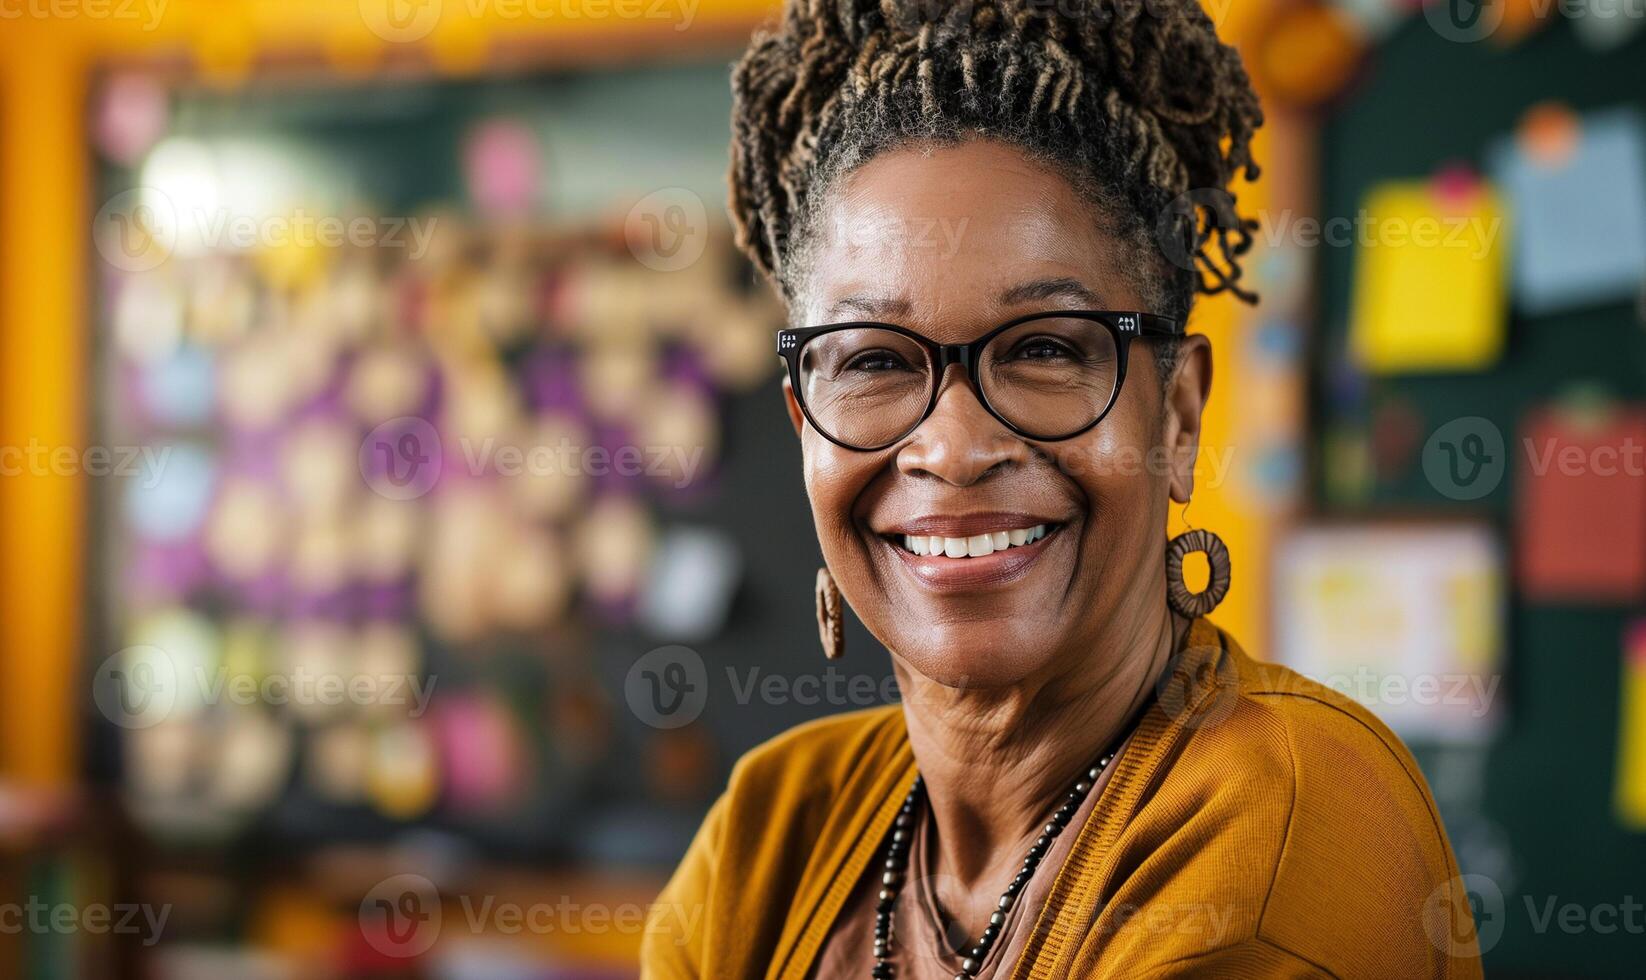 Experienced African American Educator Inspiring Students in a Classroom Setting photo